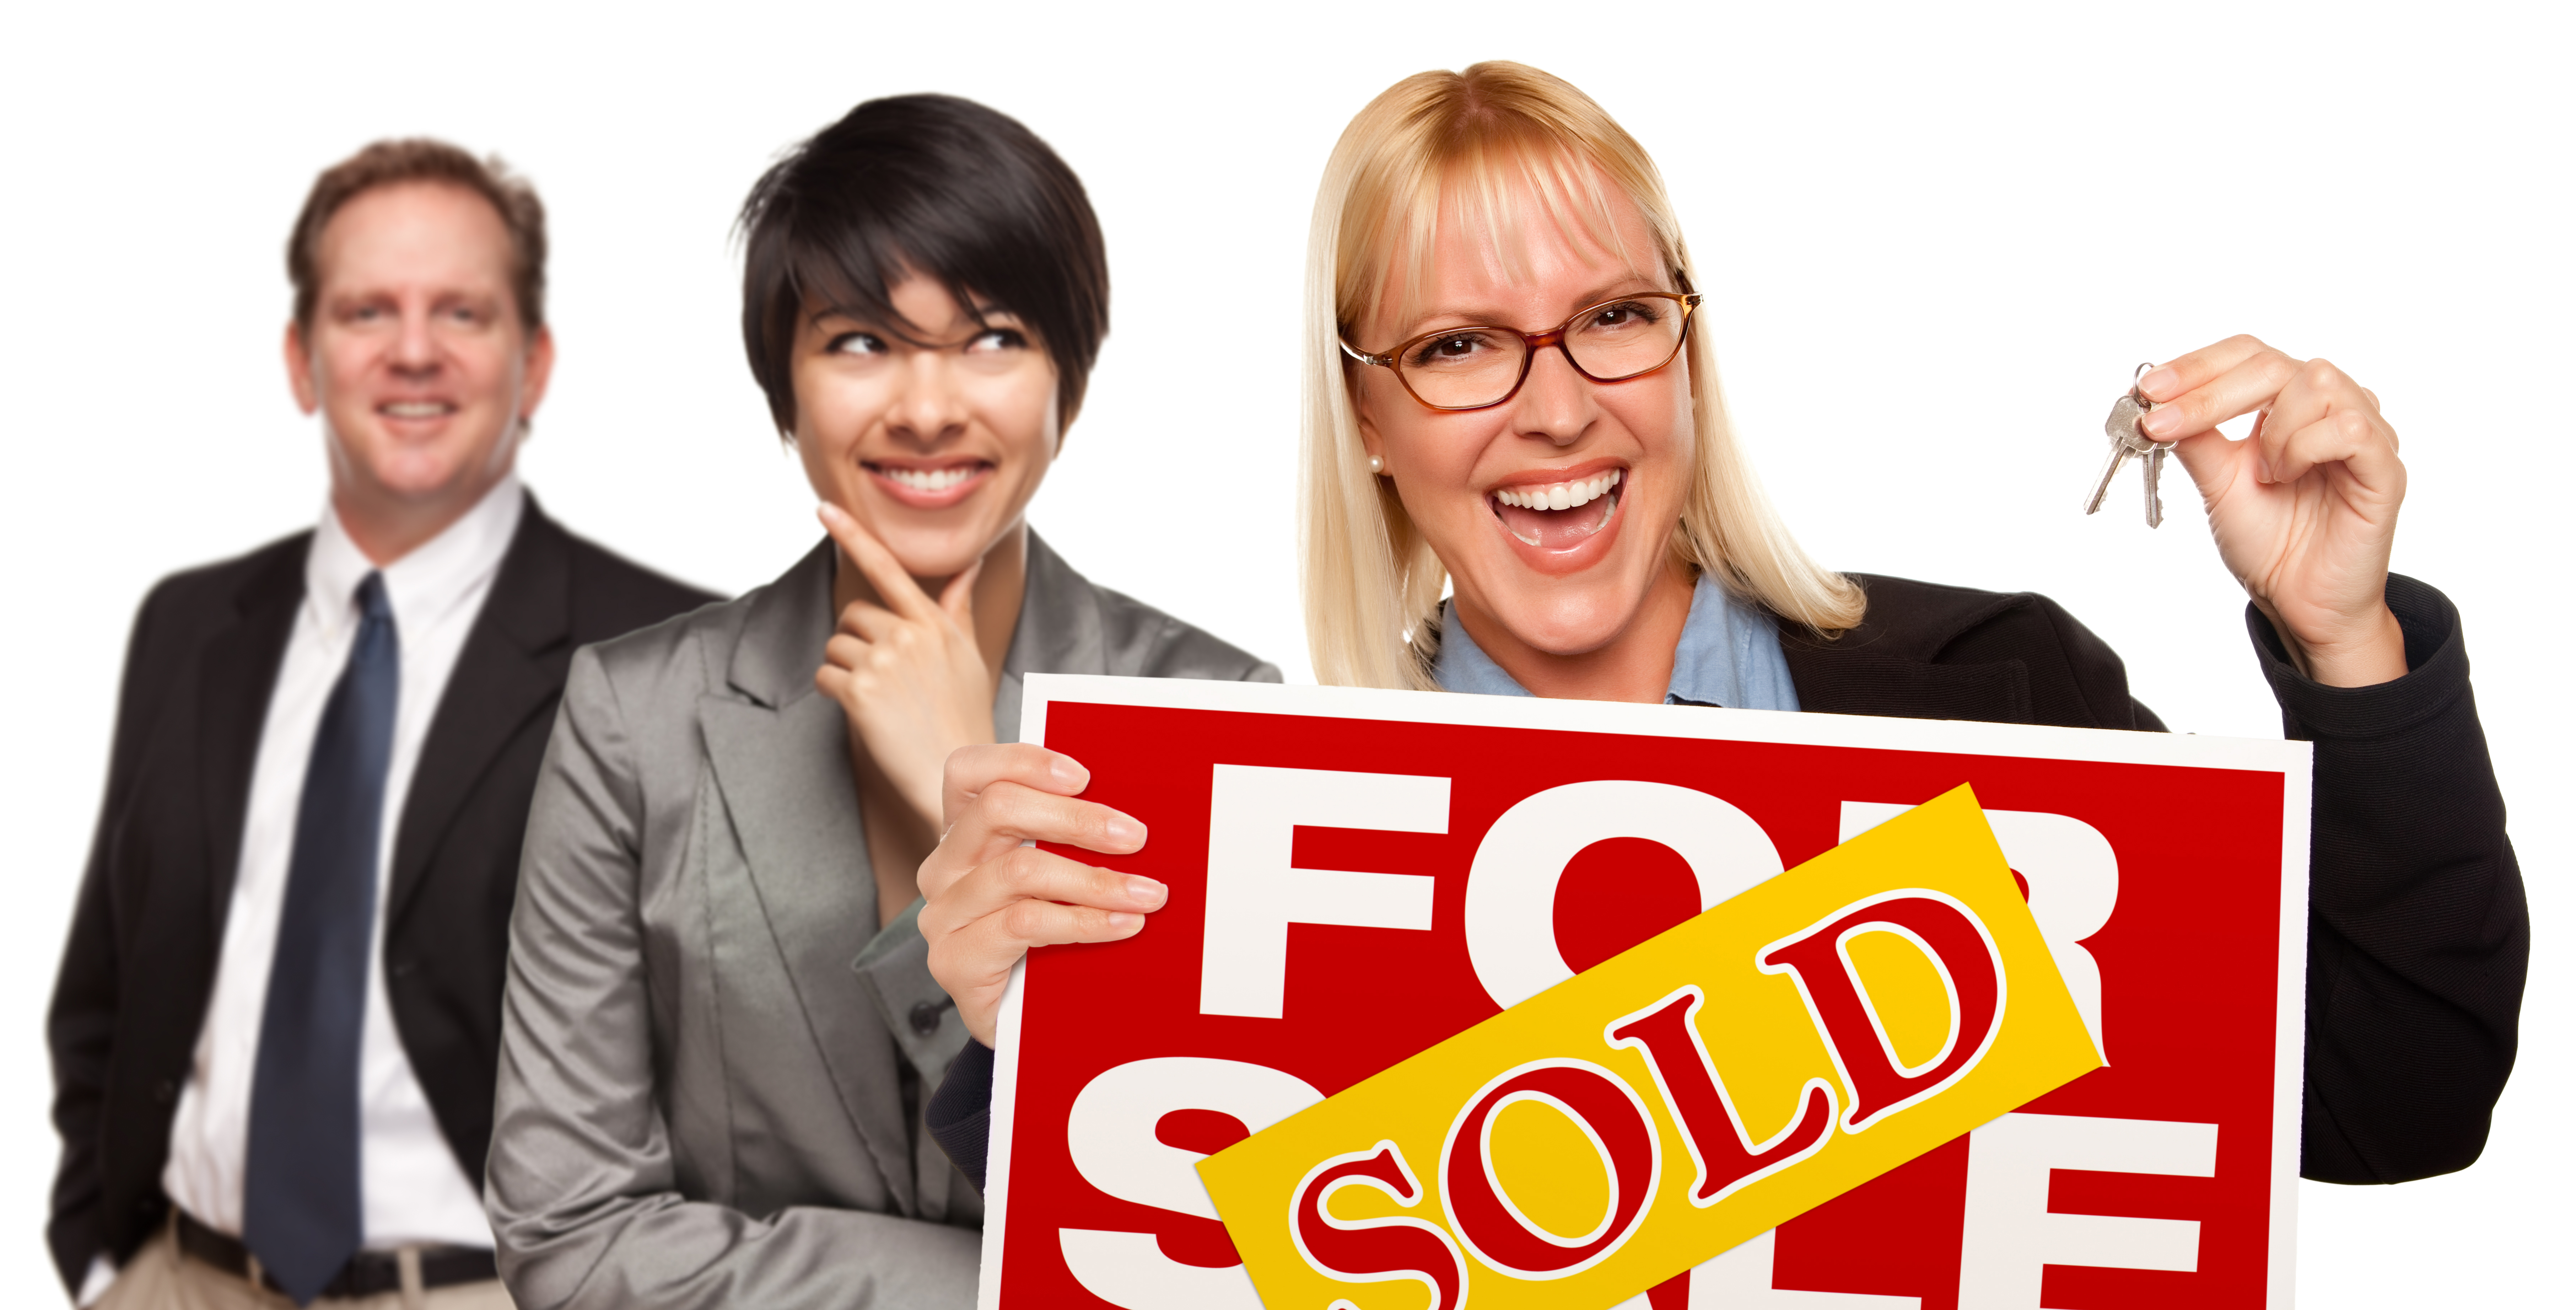 Real Estate Team Behind with Blonde Woman in Front Holding Keys and Sold For Sale Real Estate Sign Isolated on a White Background.